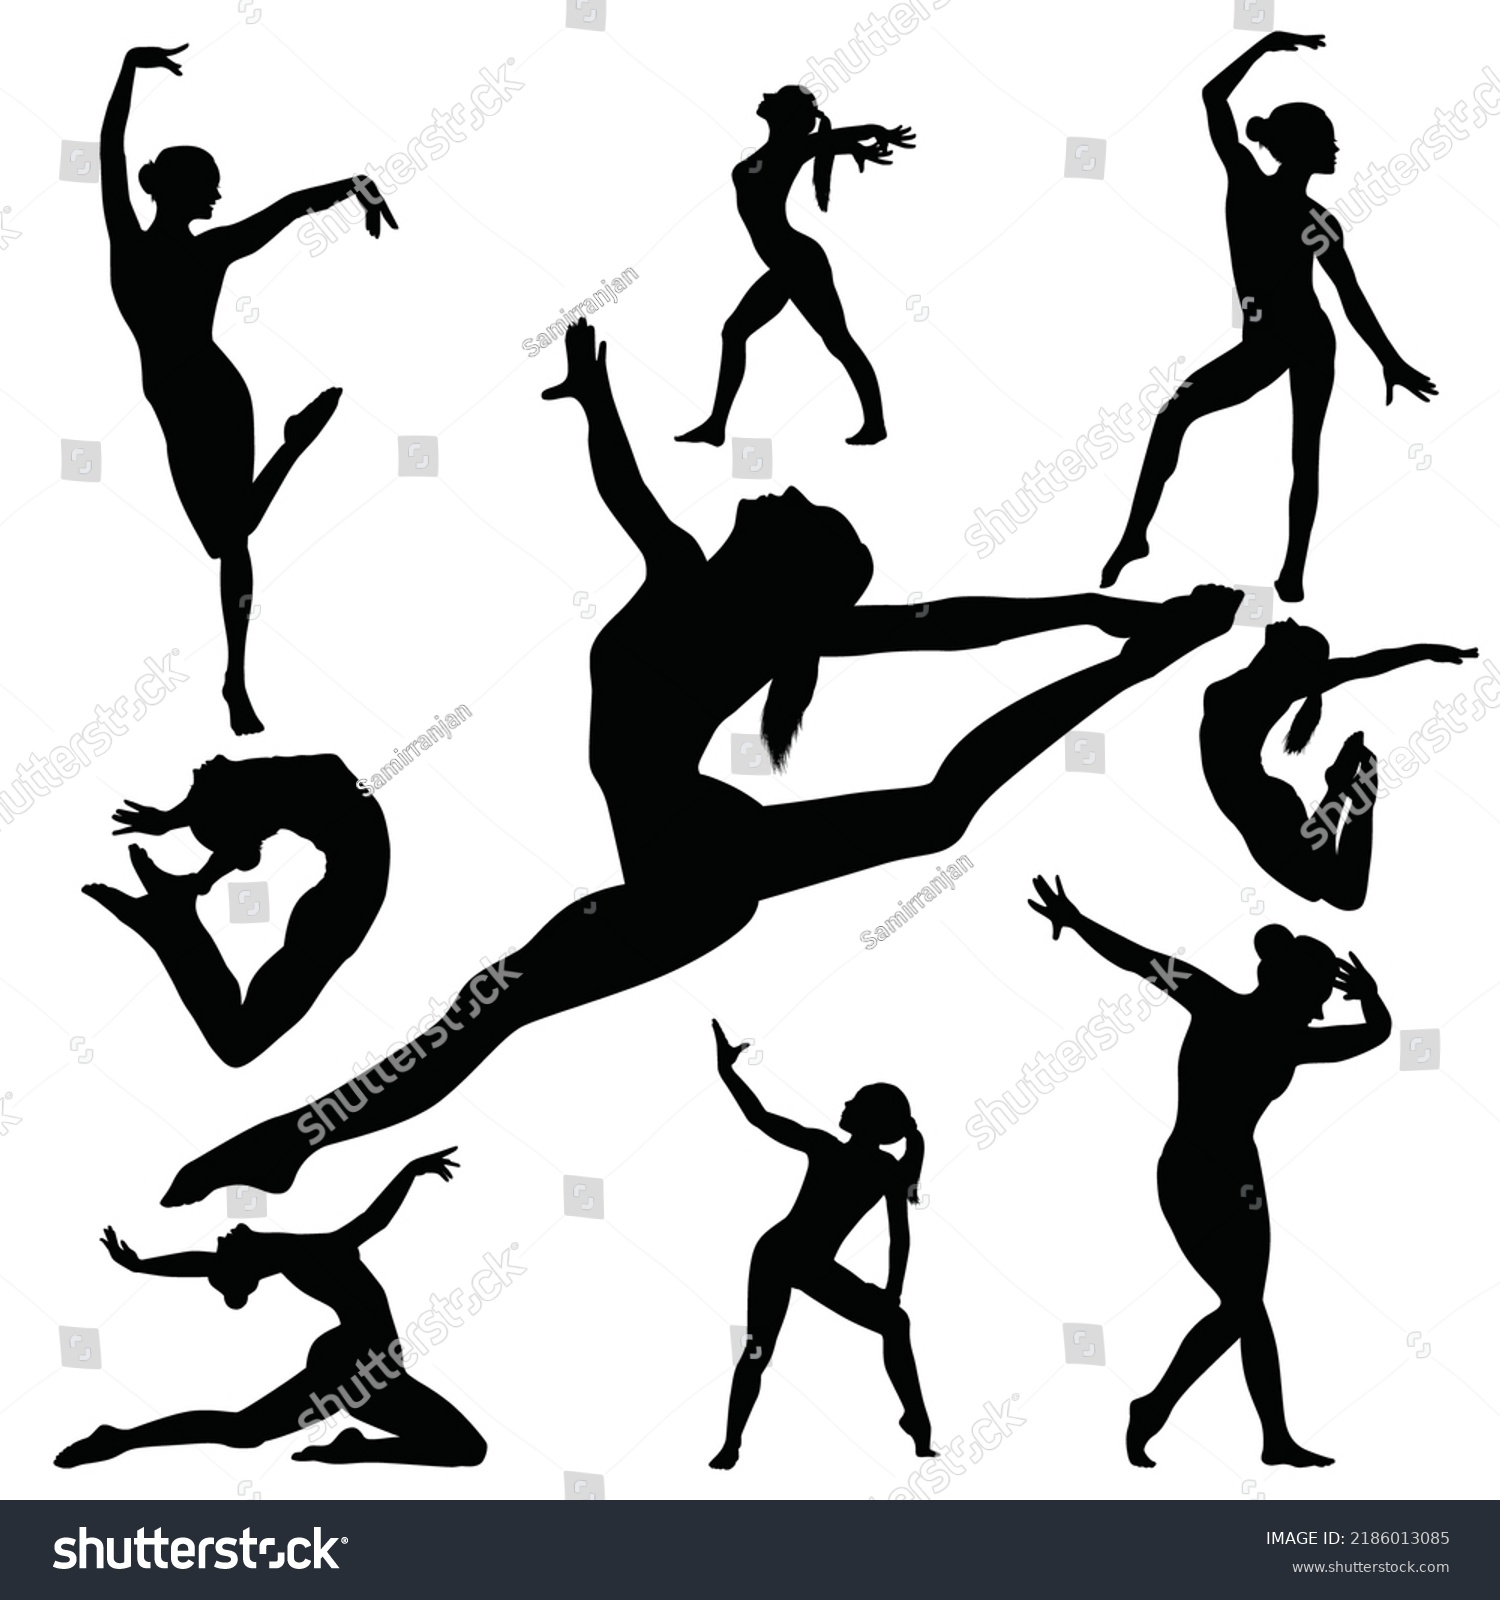 Vector Illustration Girls Gymnastic Poses Silhouettes Stock Vector ...